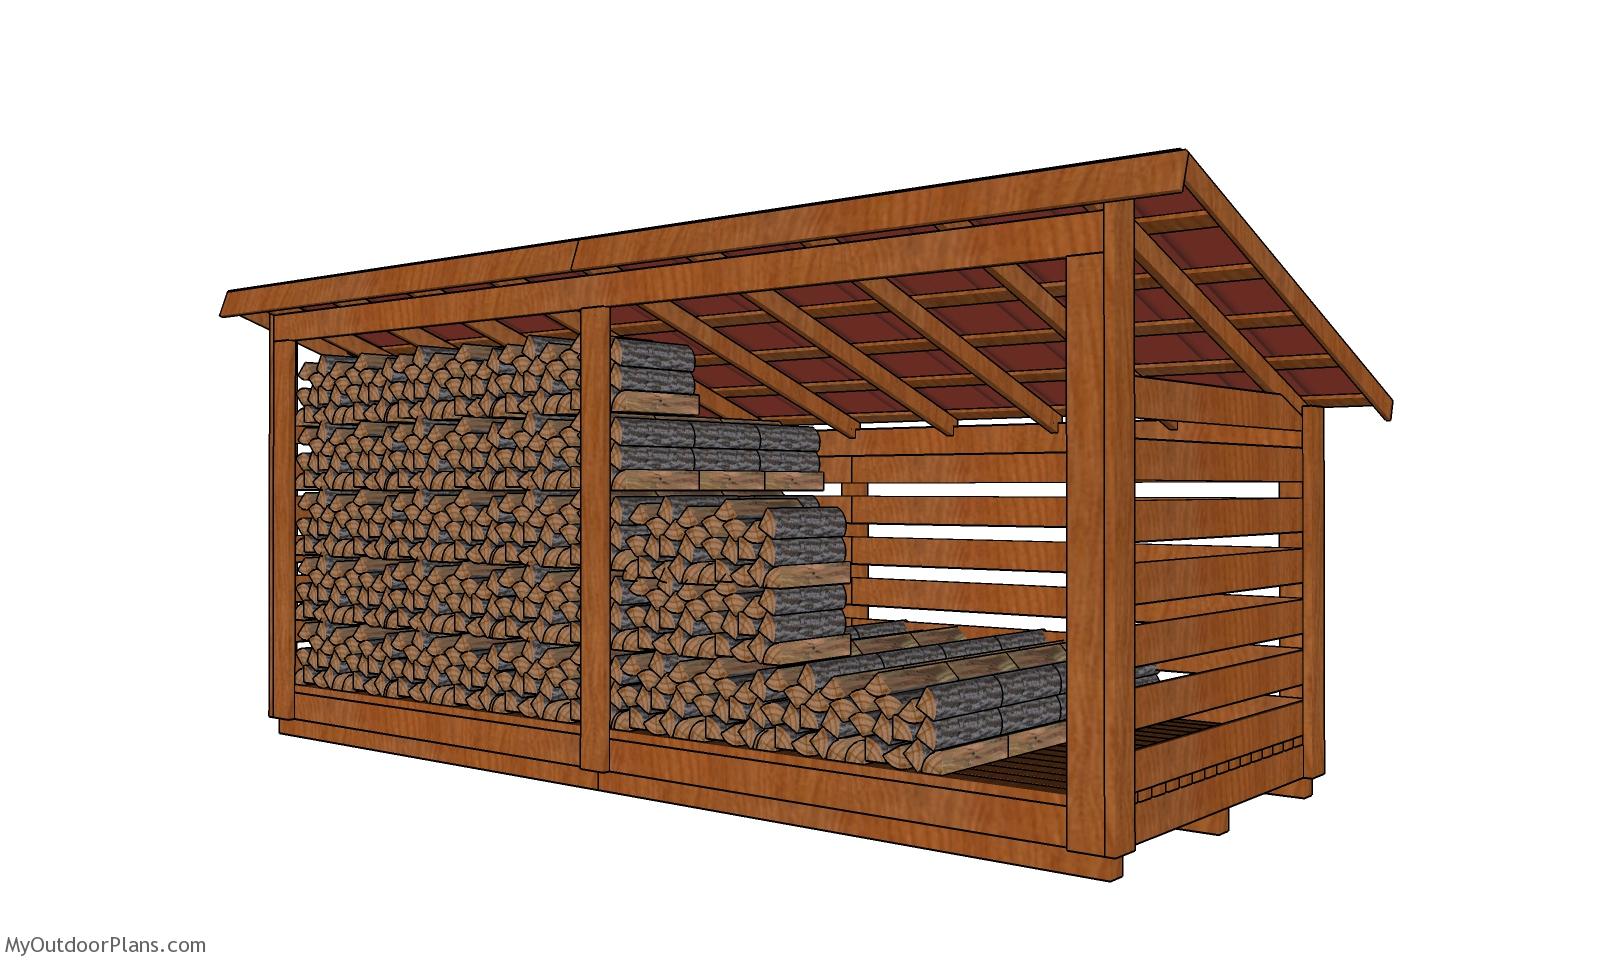 6×16 4 Cord Wood Storage Shed Plans